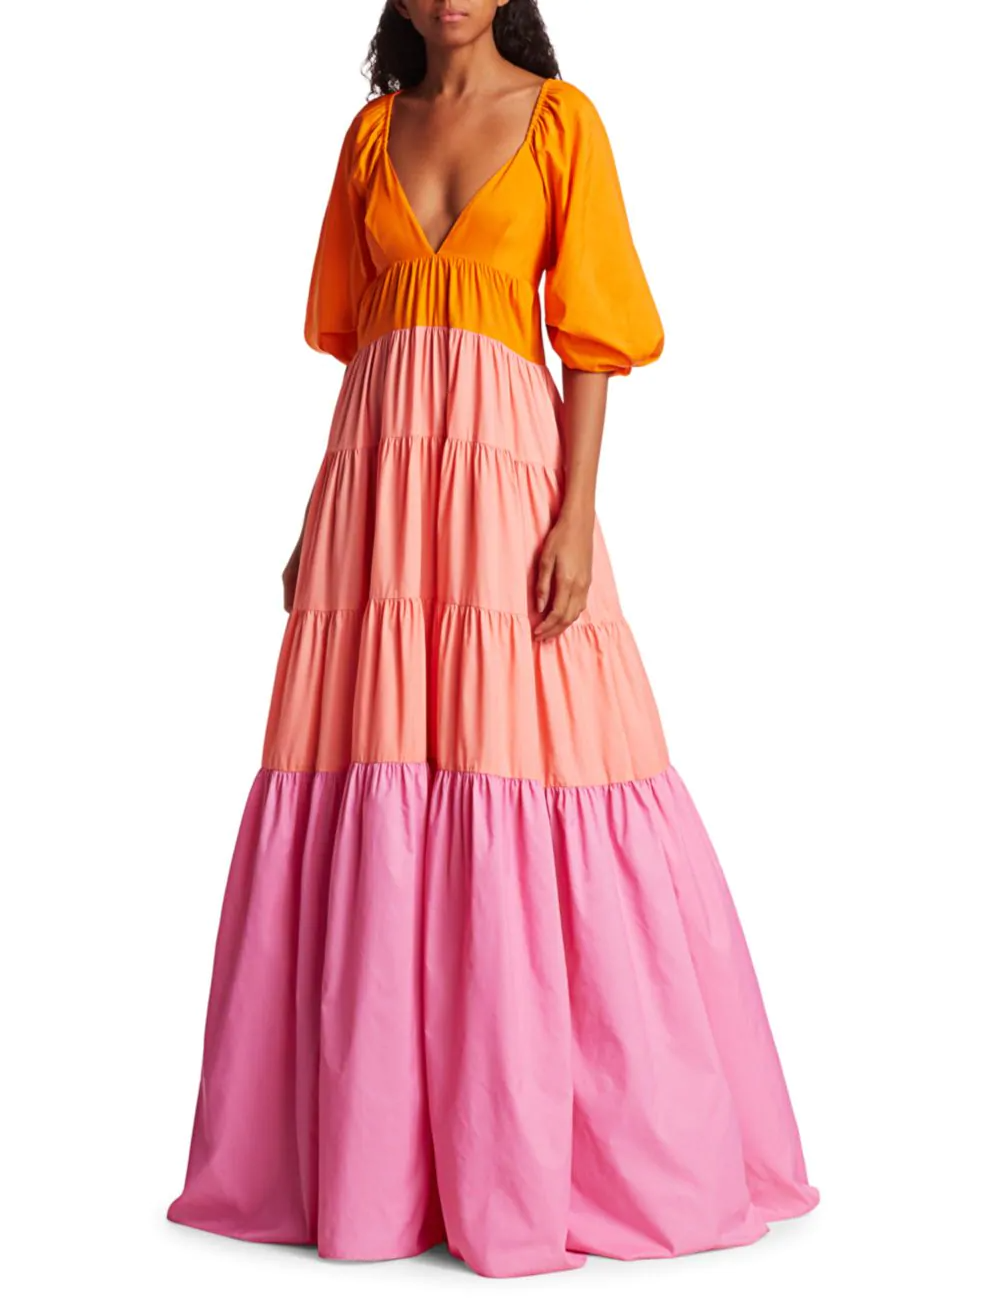 Farm Rio Tiered Colorblocked Maxi Dress | vlr.eng.br